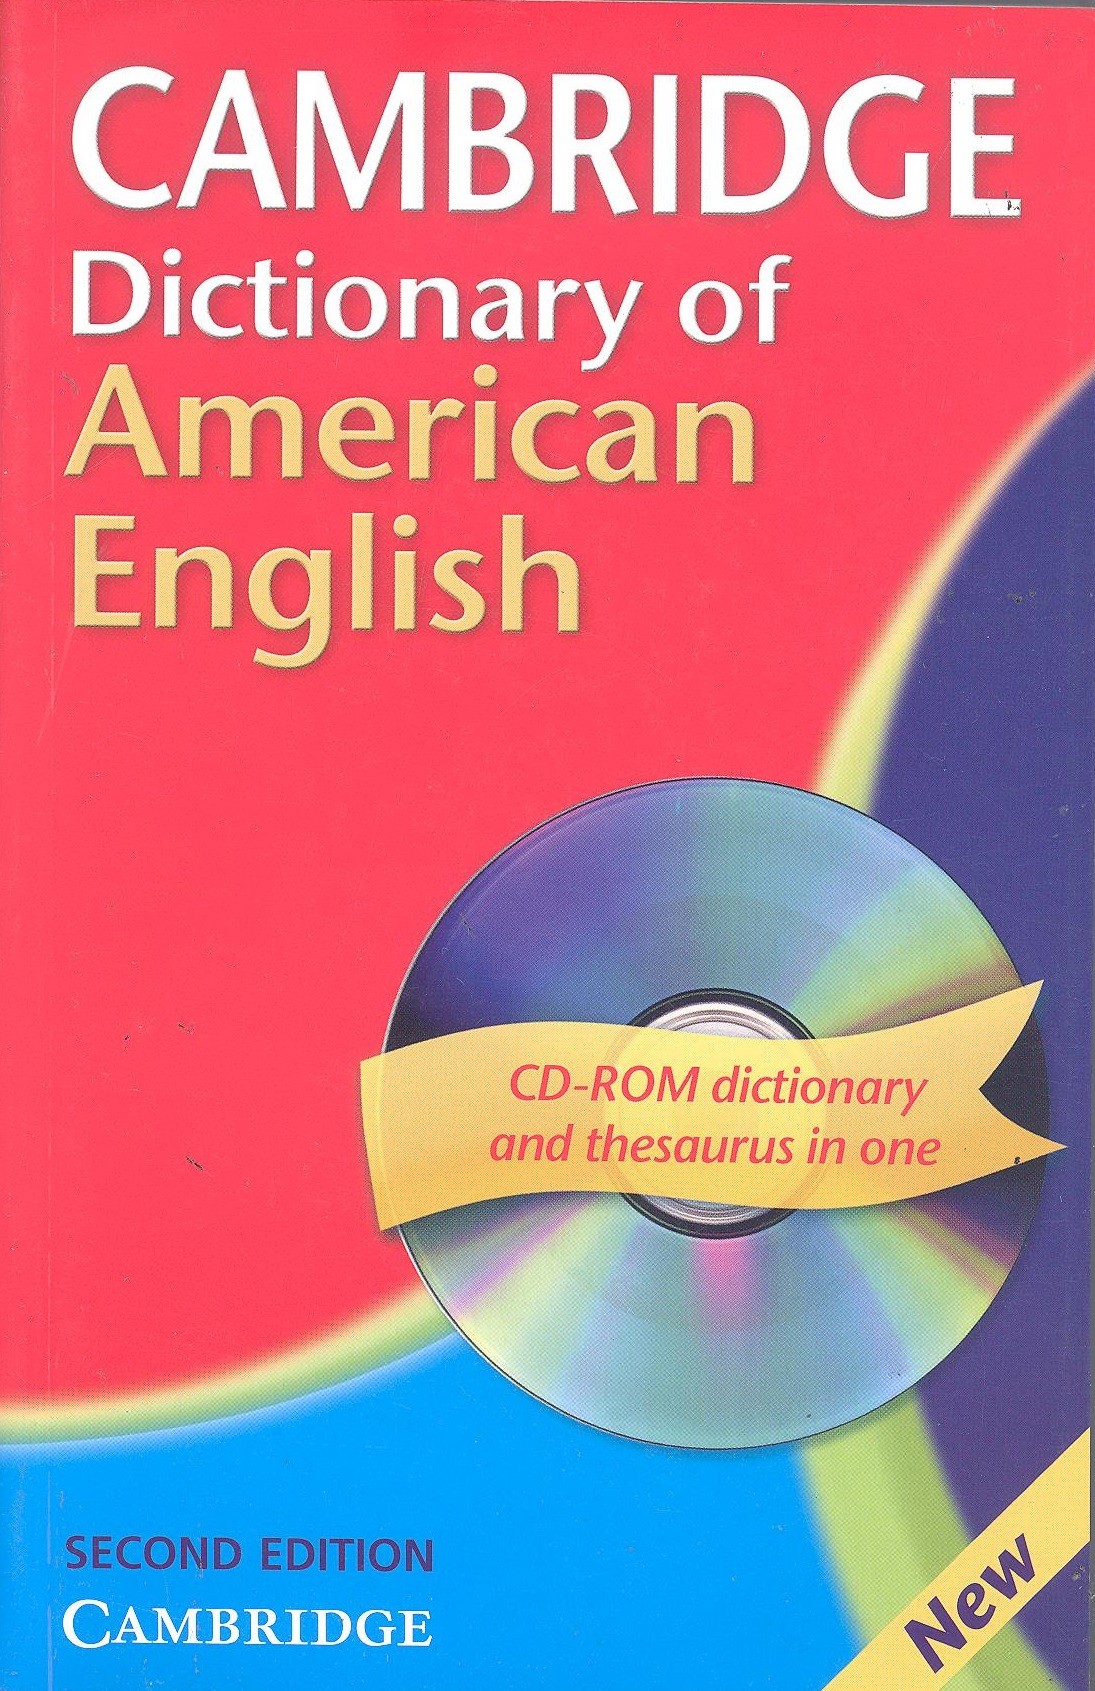 CAMBRIDGE DICTIONARY OF AMERICAN ENGLISH 2nd ED + CD-ROM